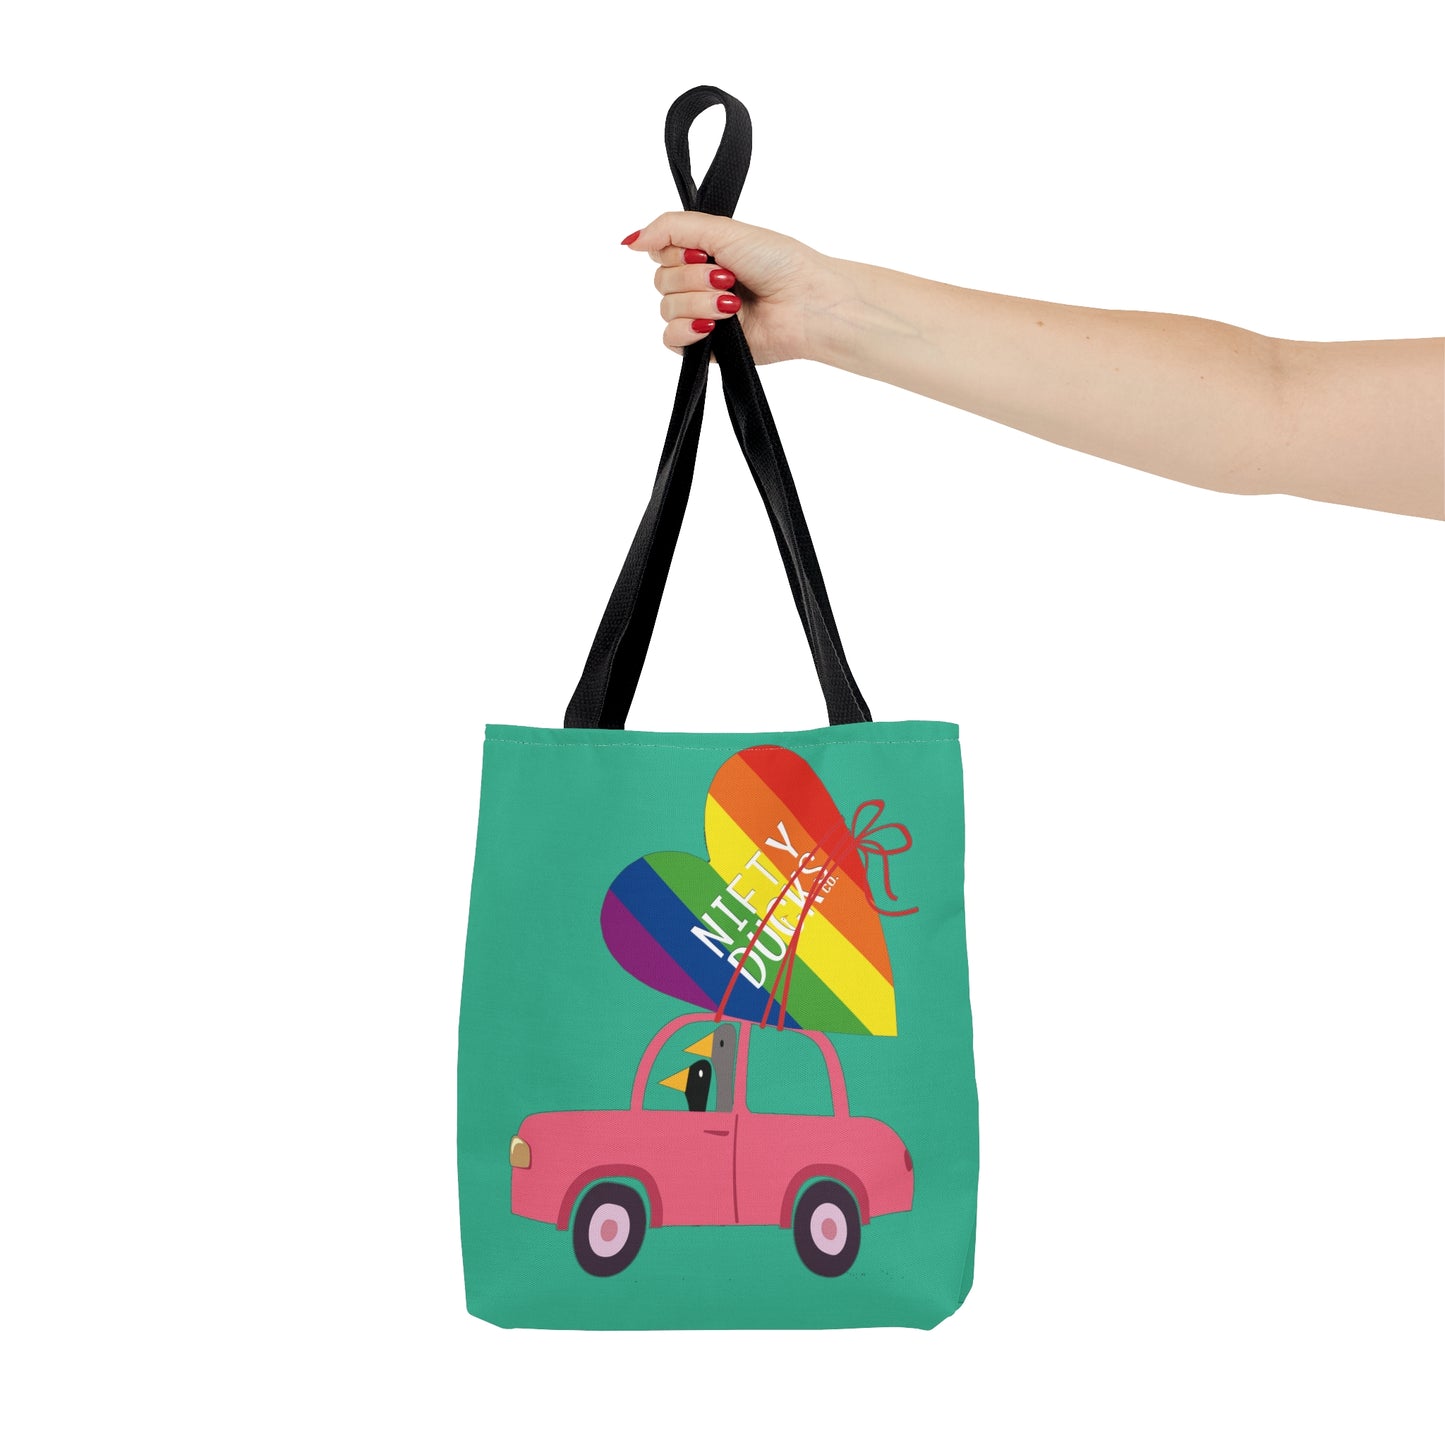 Ducks delivering a lot of love - Pride - Turquoise 12d3ad - Tote Bag